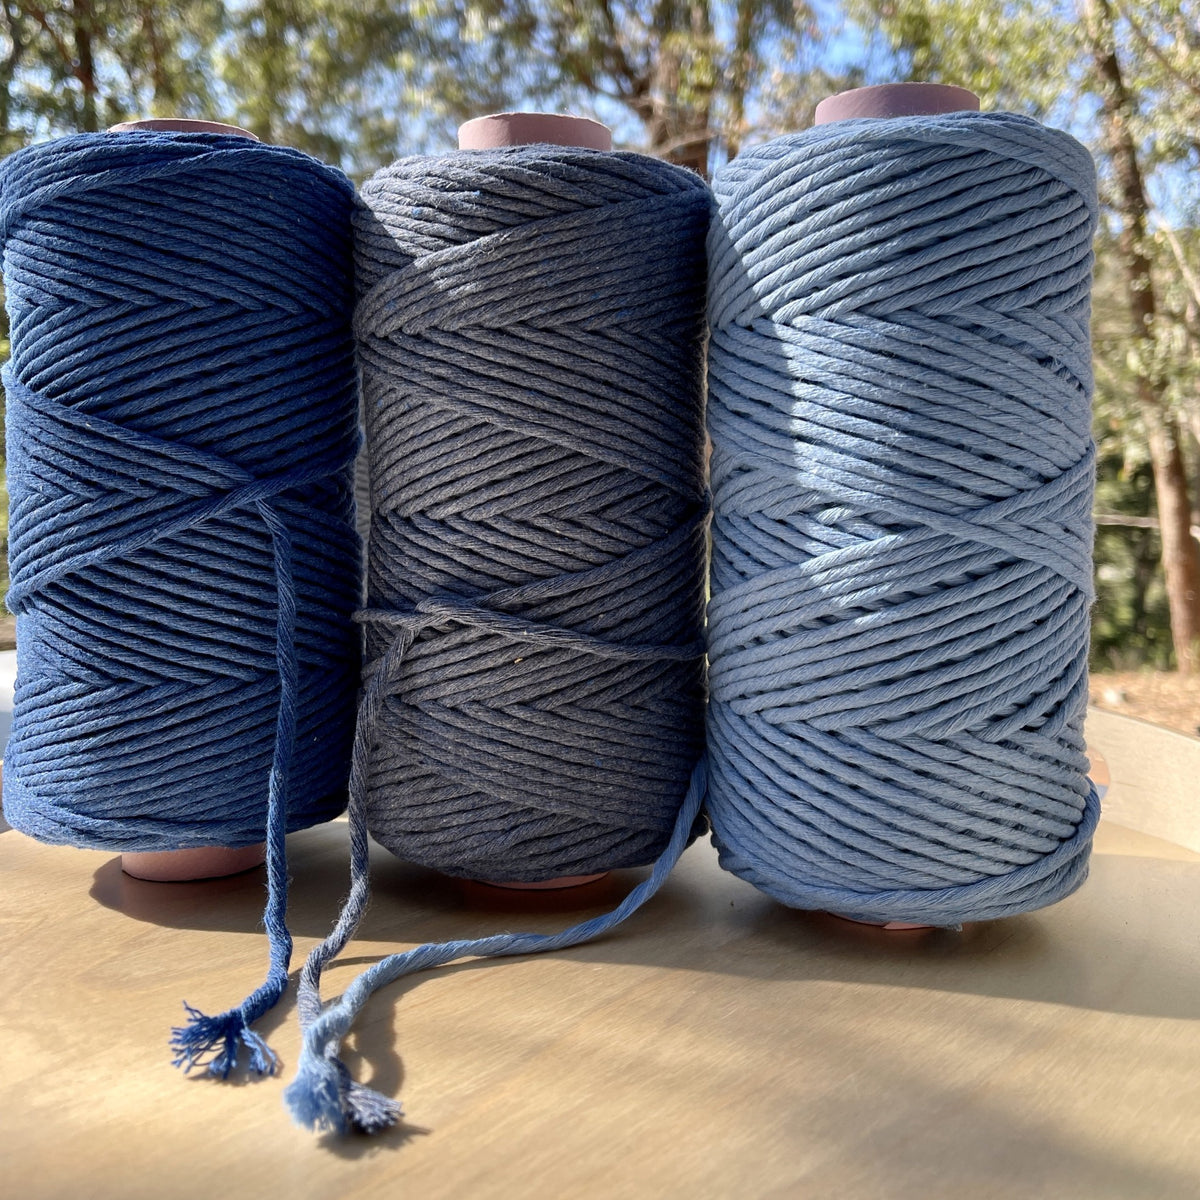 Recycled cotton for Macrame Weaving - Ada Fibres